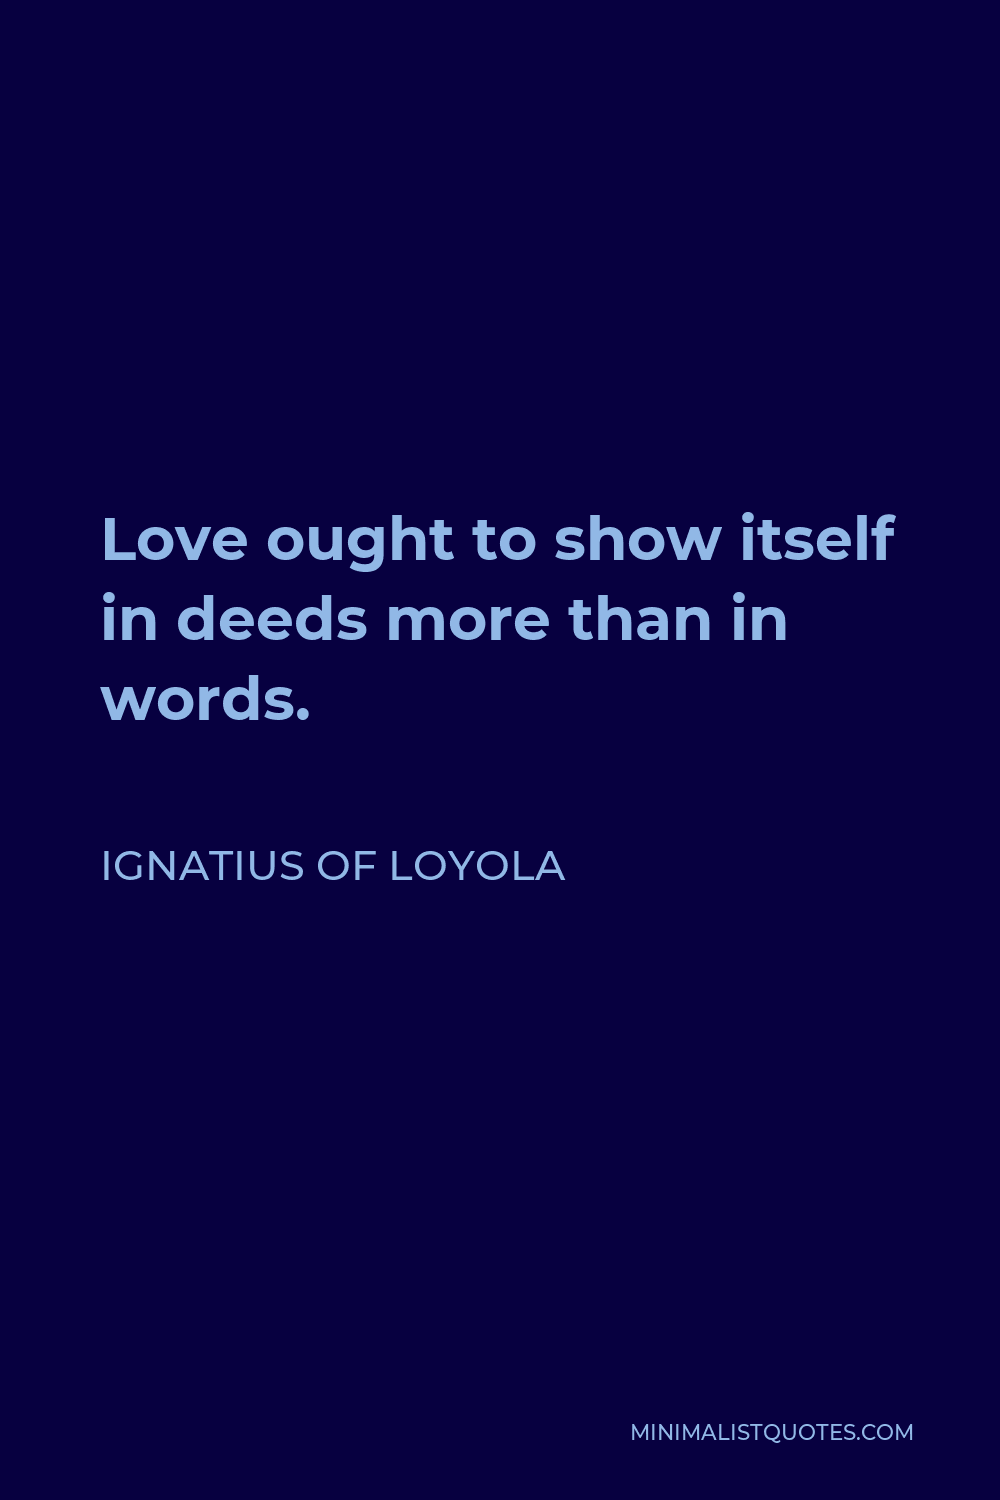 Ignatius of Loyola Quote - Love ought to show itself in deeds more than in words.